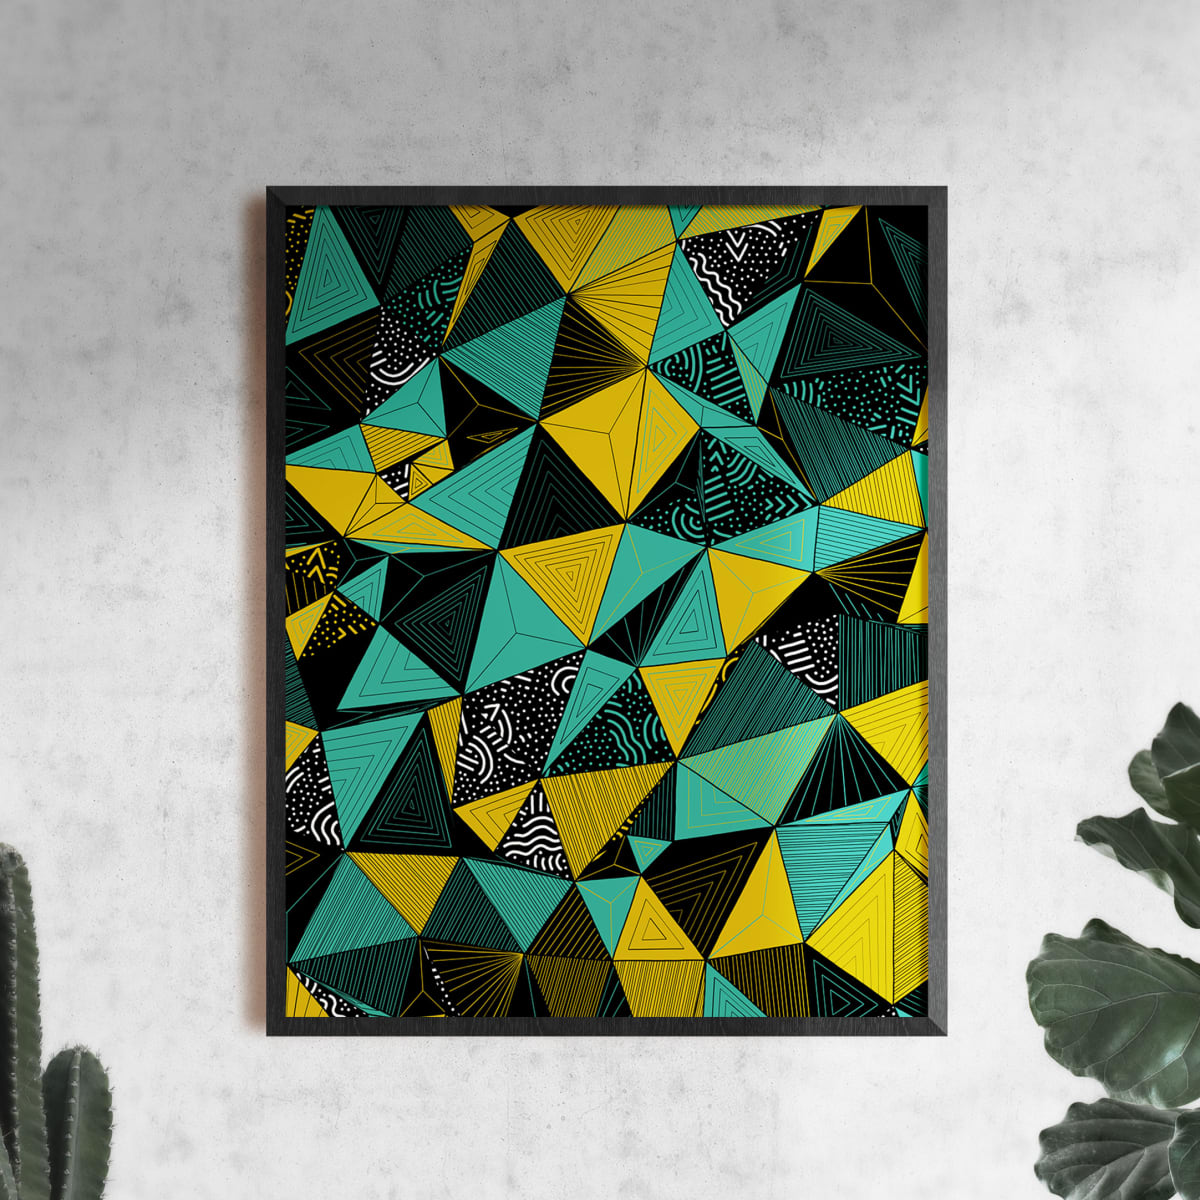 "Conscious Growth 073" Large One-of-a-Kind Print by Debbie Clapper  Image: Conscious Growth Print 073, a green, yellow, black and white one of a kind archival modern art print